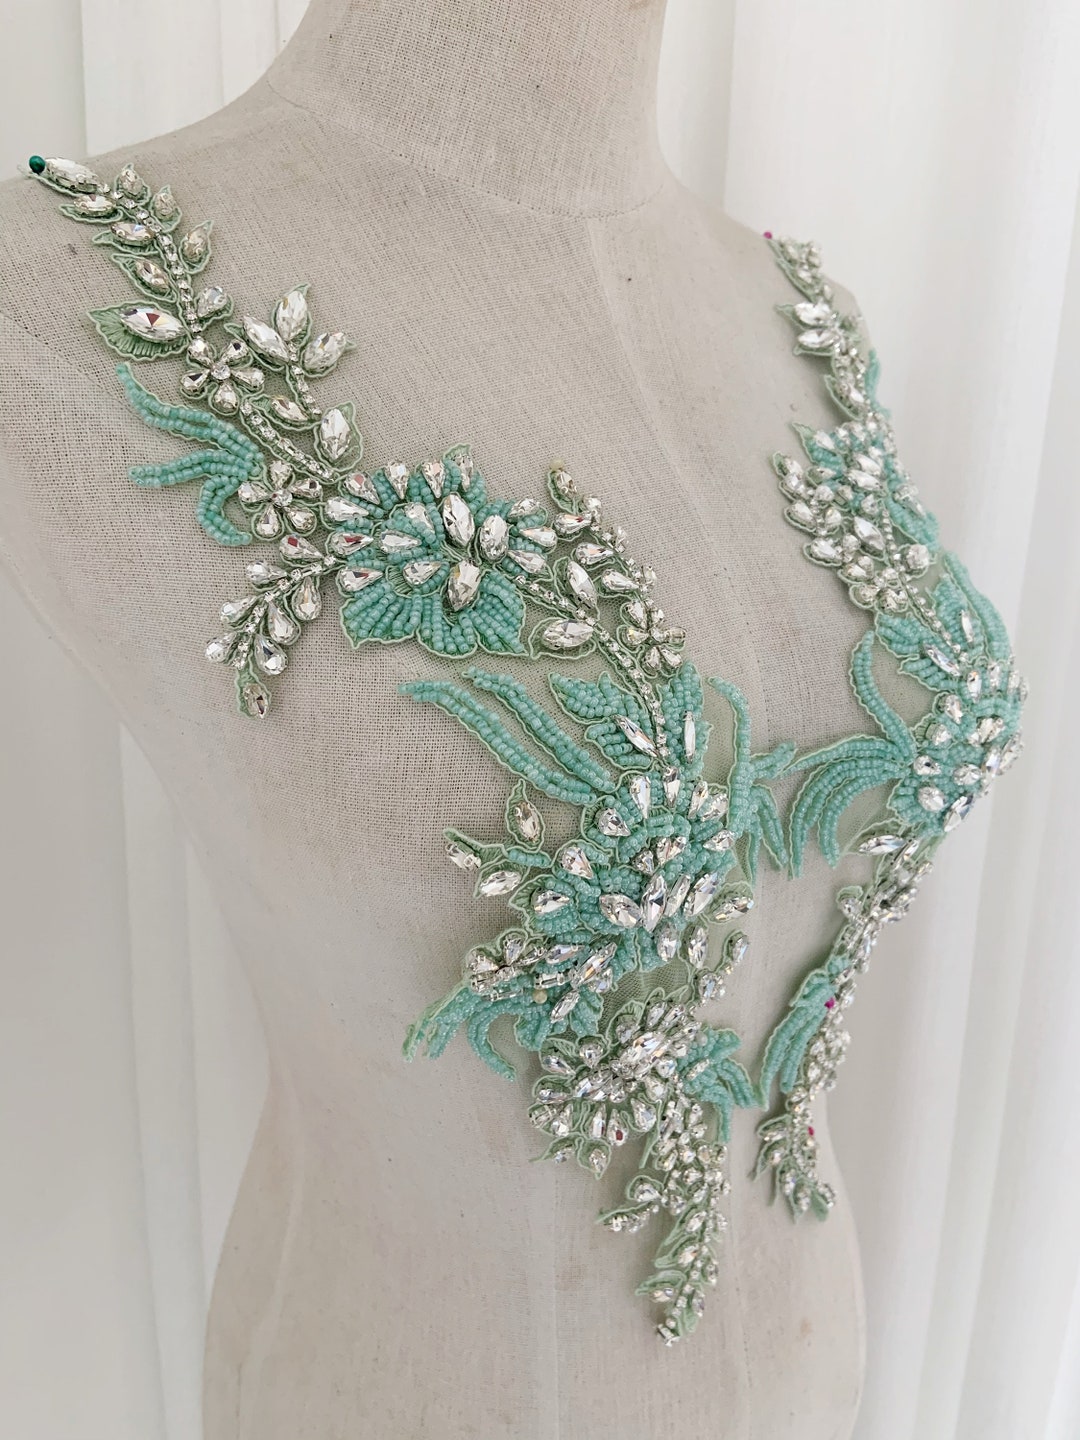 Mint Green Rhinestone Applique With Florals Motif - Etsy